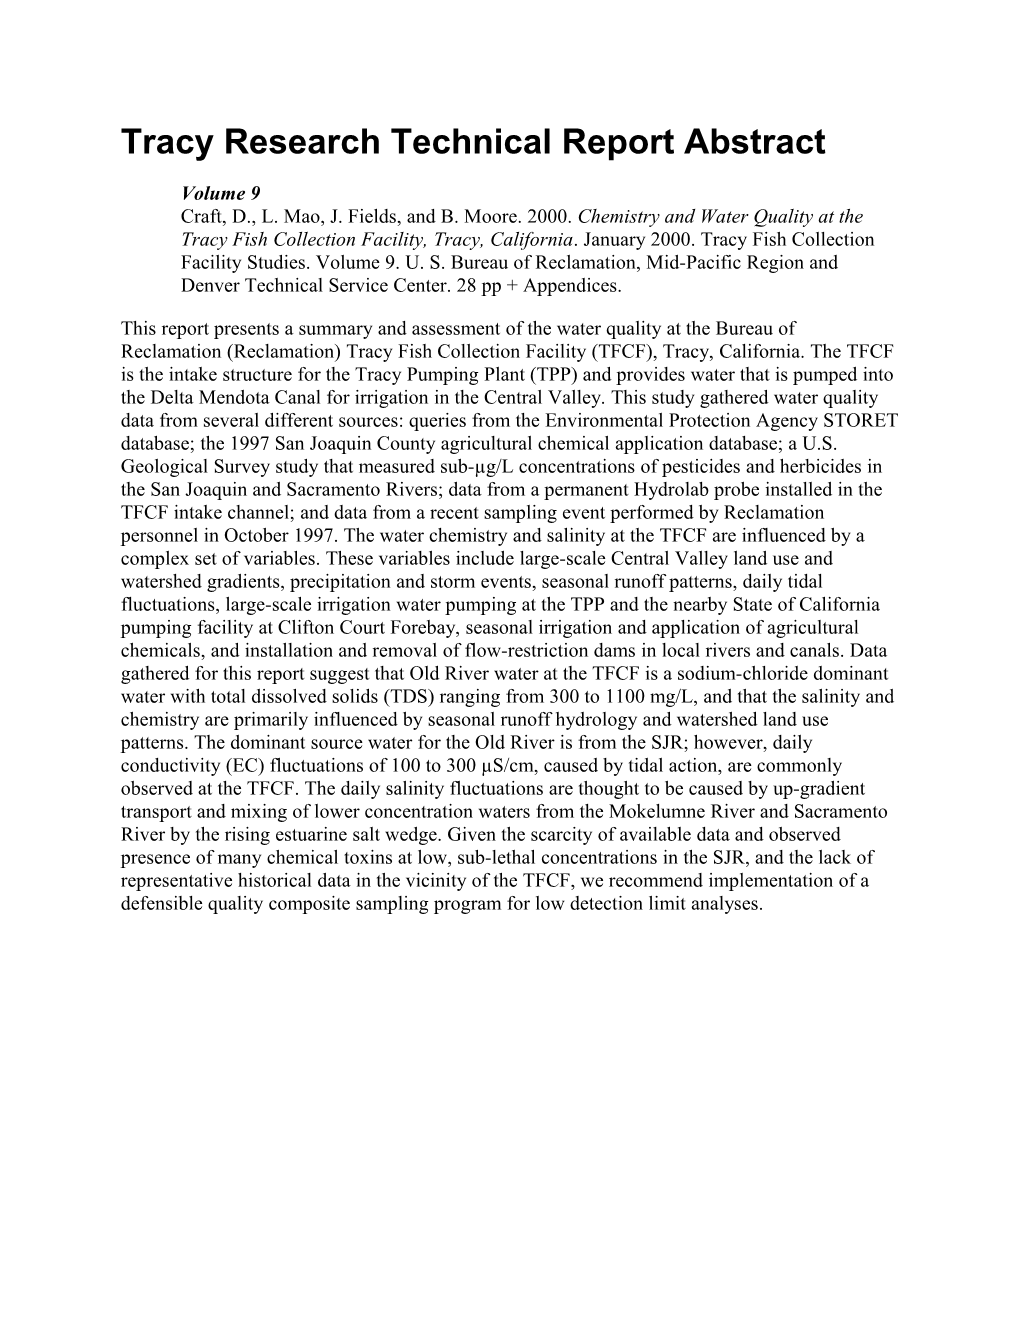 Tracy Research Tech Report Abstract Vol. 9